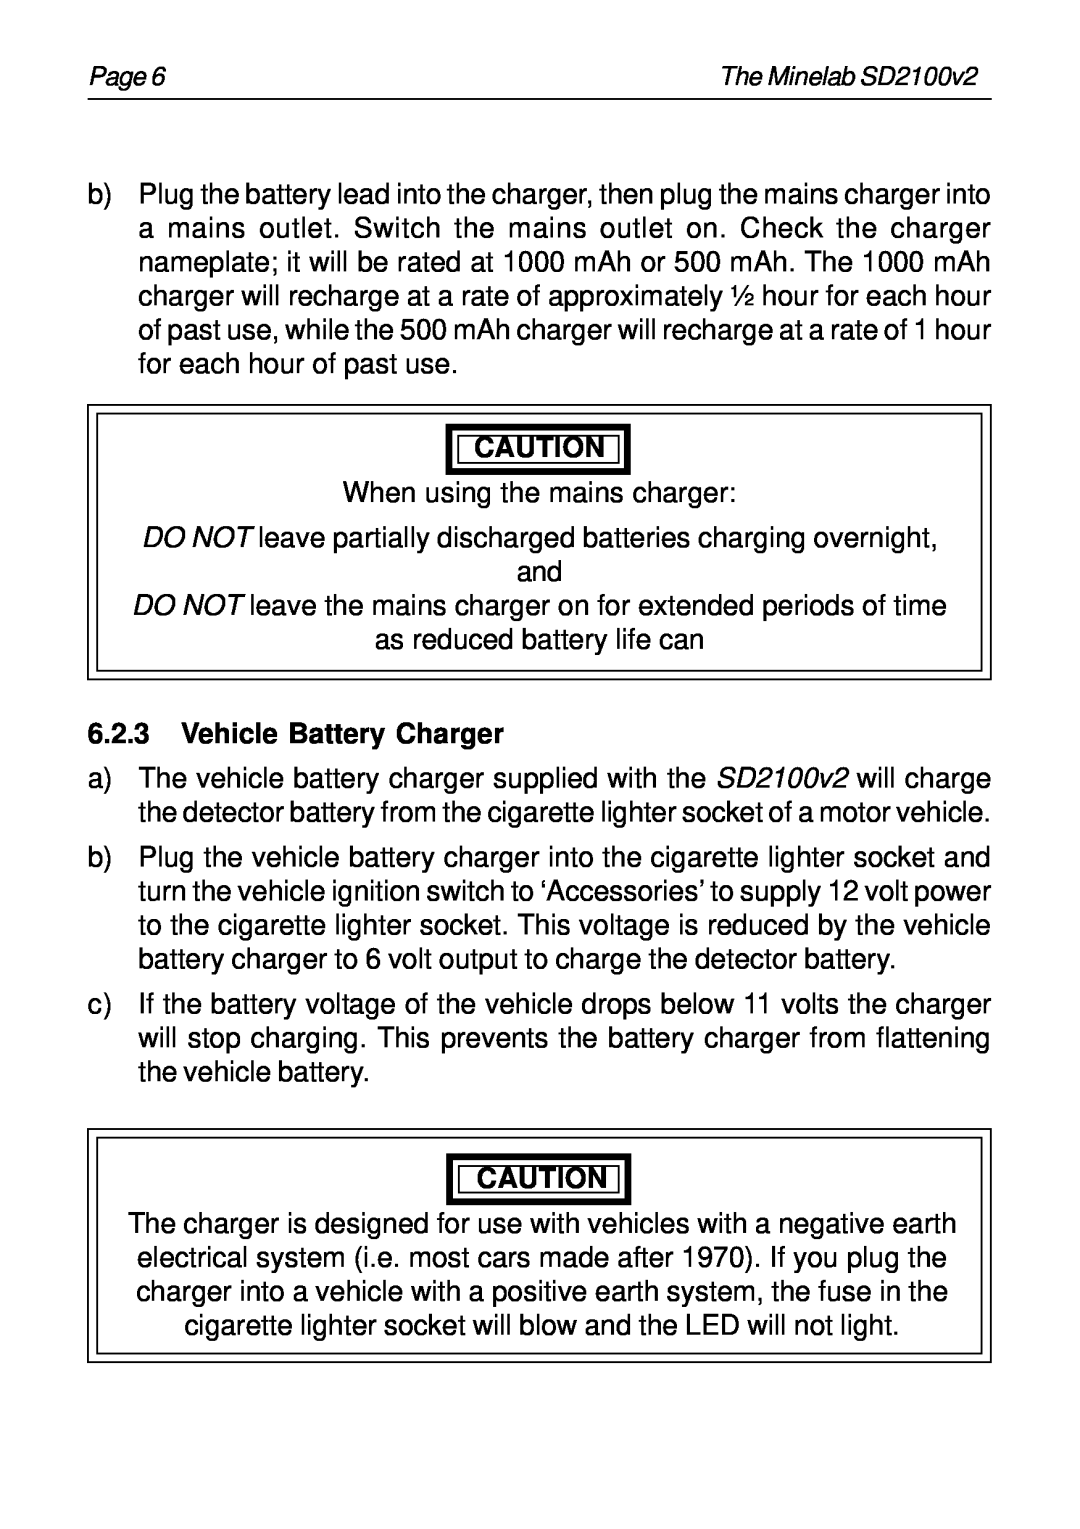 Minelab SD2100v2 instruction manual Vehicle Battery Charger 